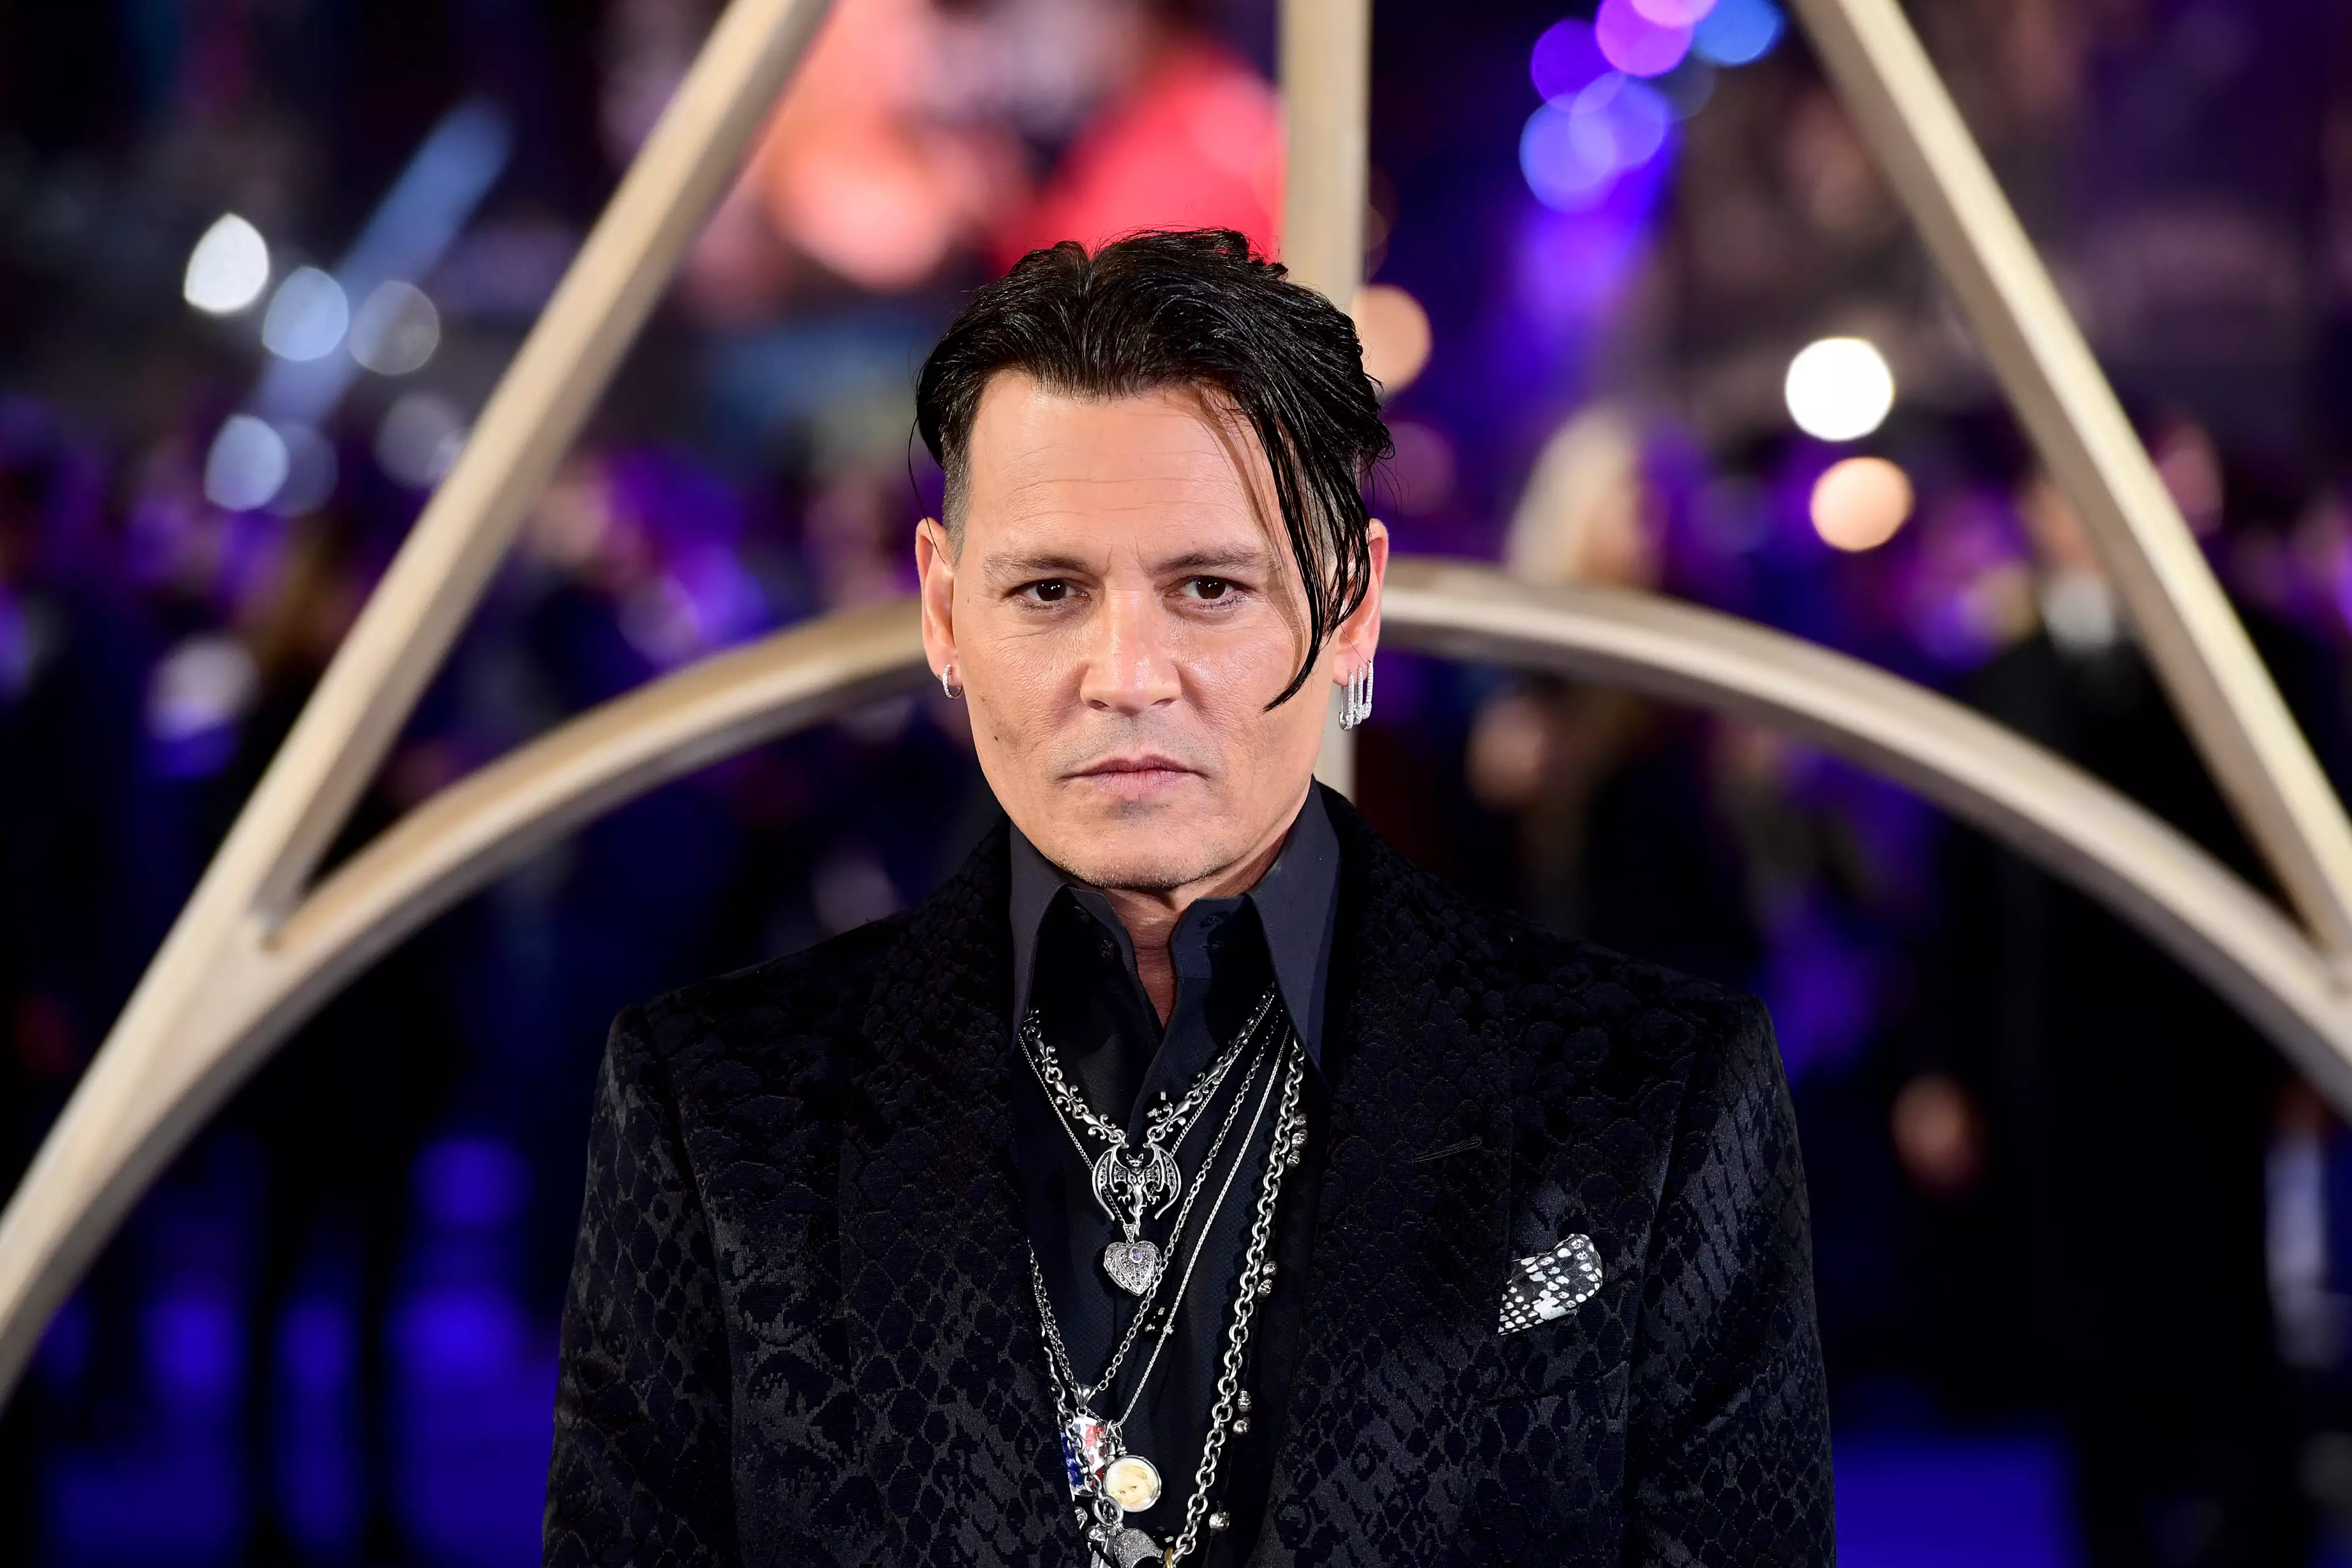 Johnny Depp who has now released a second album with his band Hollywood Vampires.